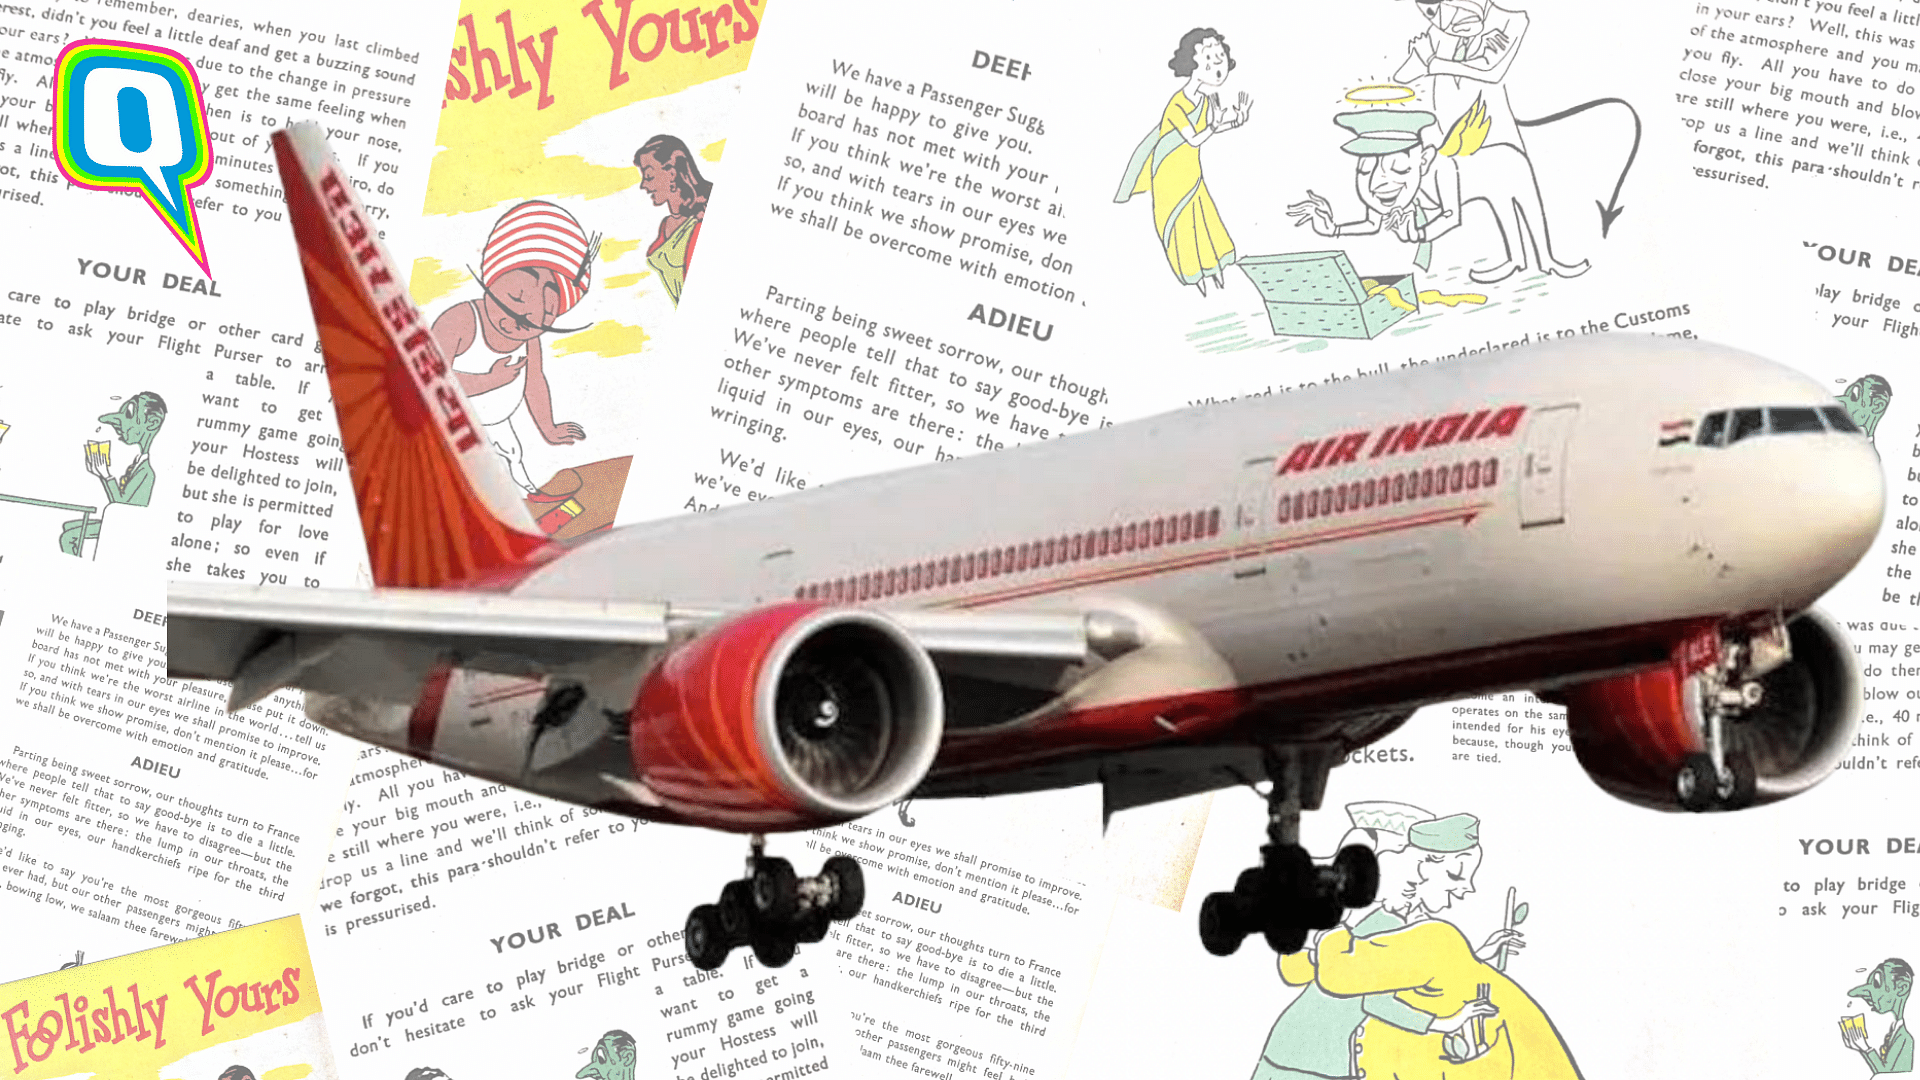 <div class="paragraphs"><p>'Foolishly Yours', a book given to Air India international passengers back in the day.</p></div>